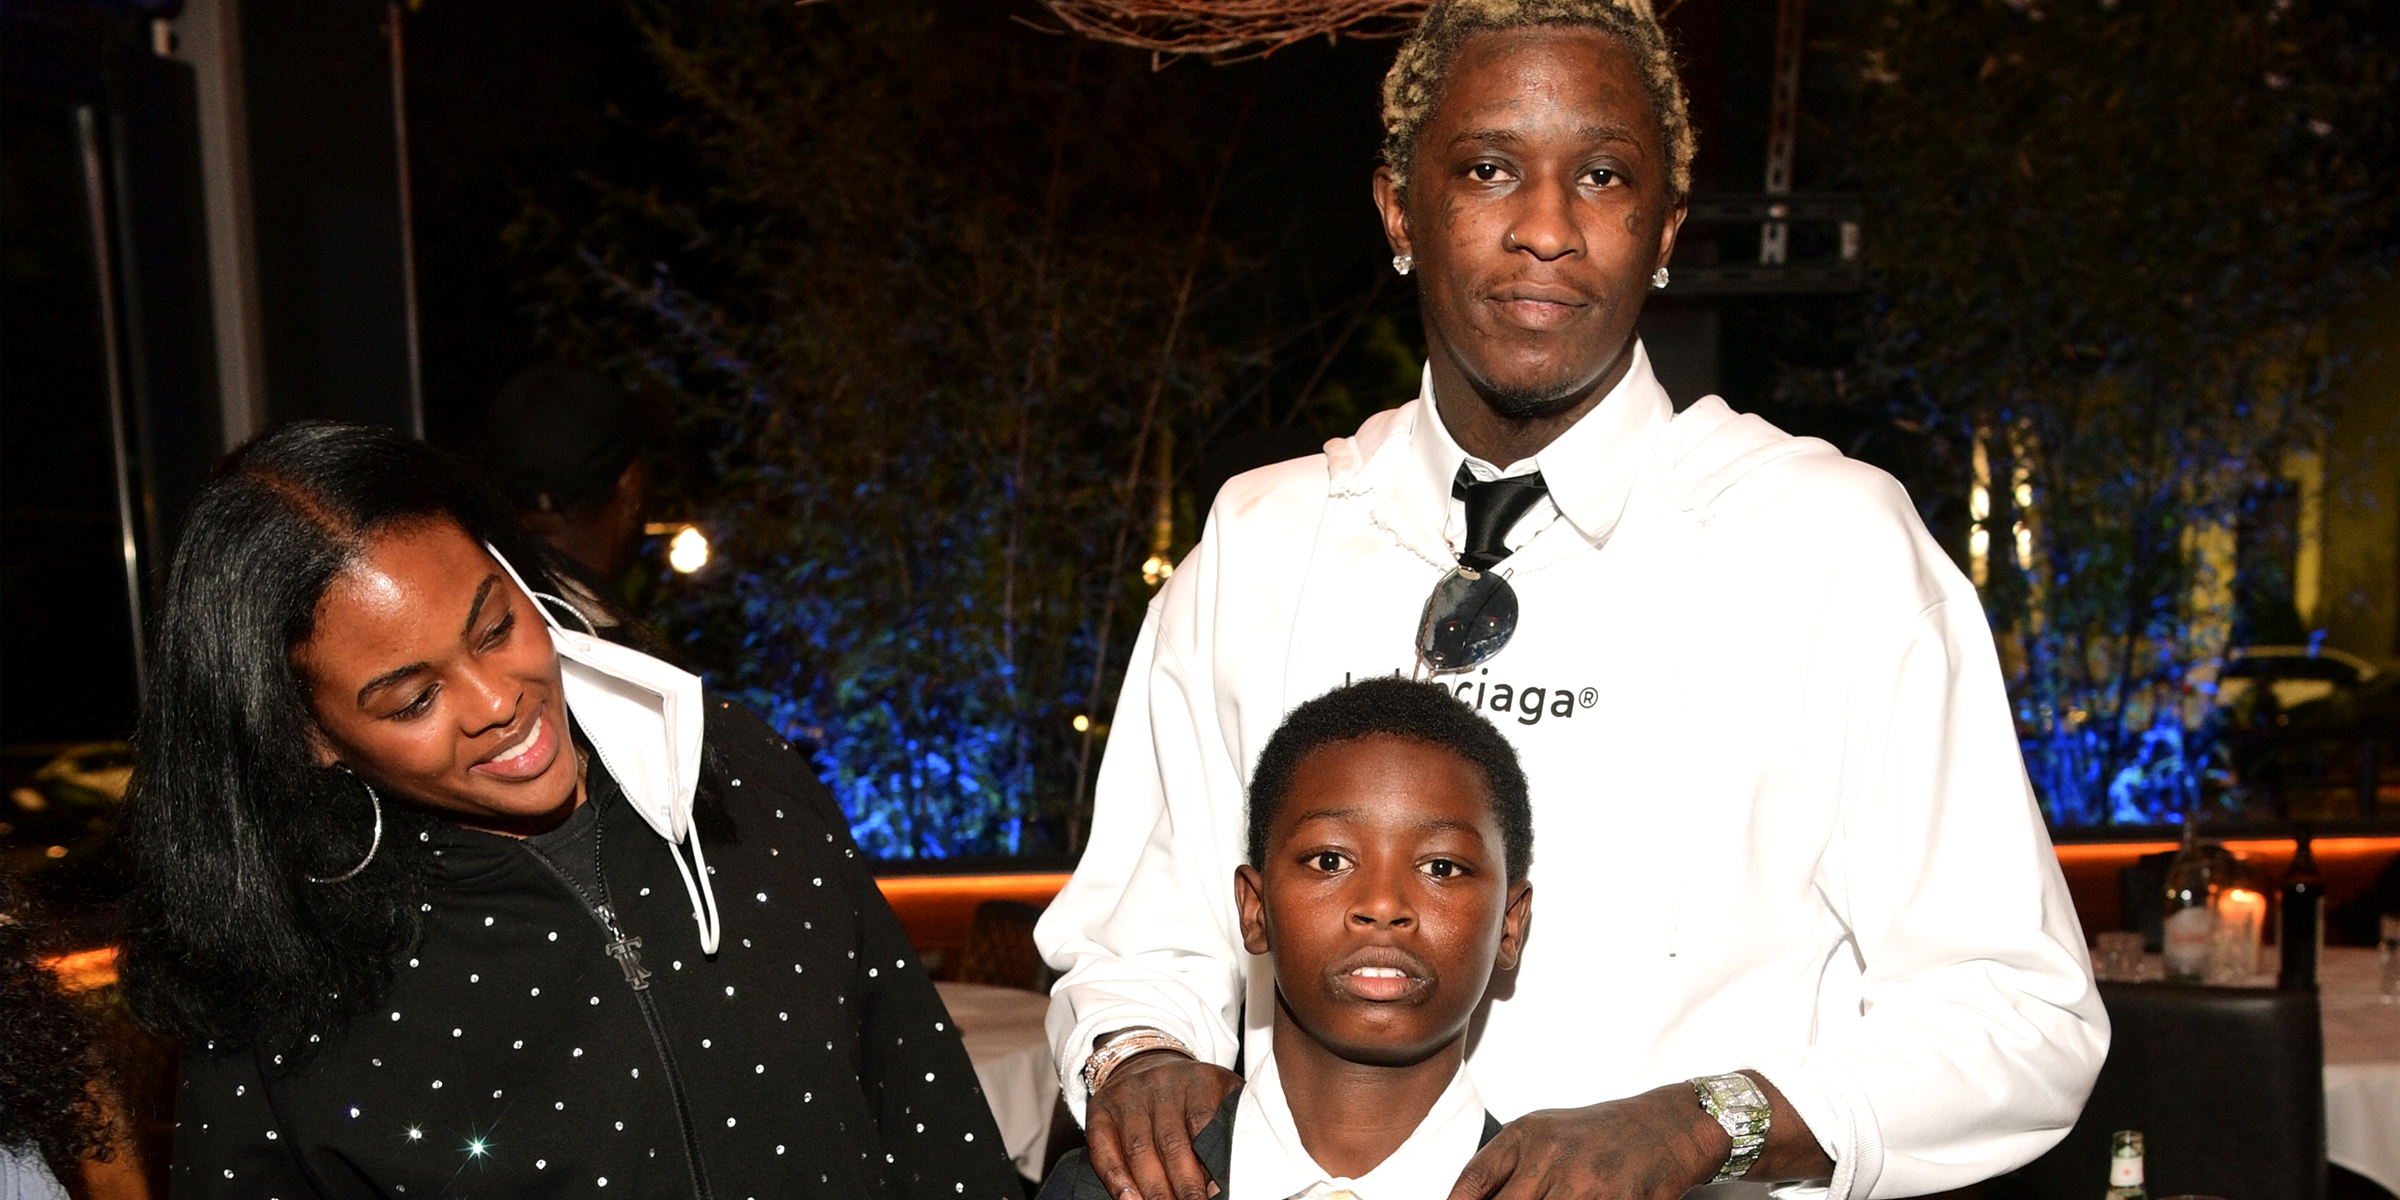 Rayna Bass, Young Thug, and his son | Source: Getty Images